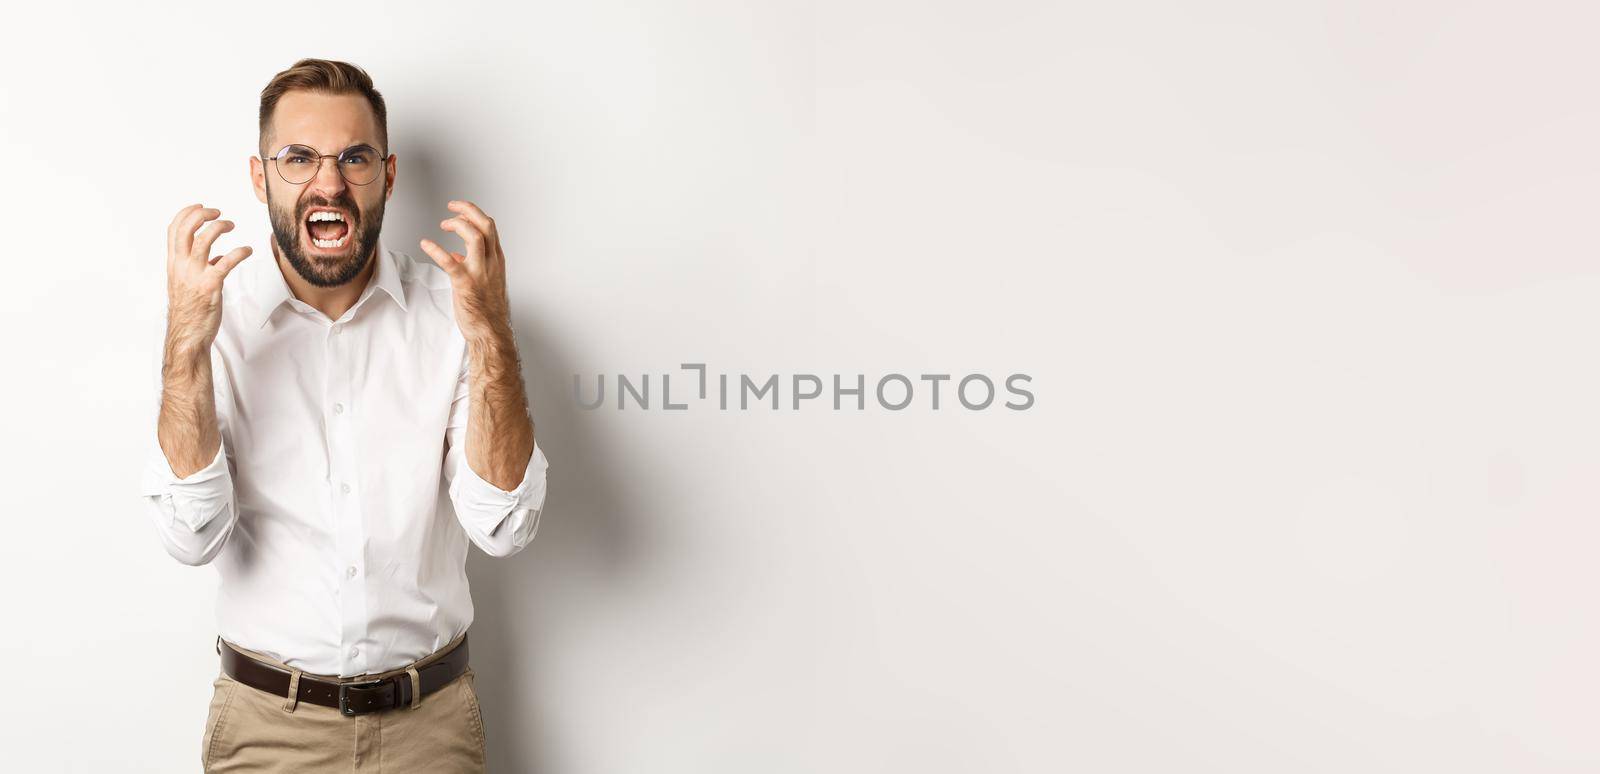 Frustrated and angry man screaming in rage, shaking hands furious, standing over white background.